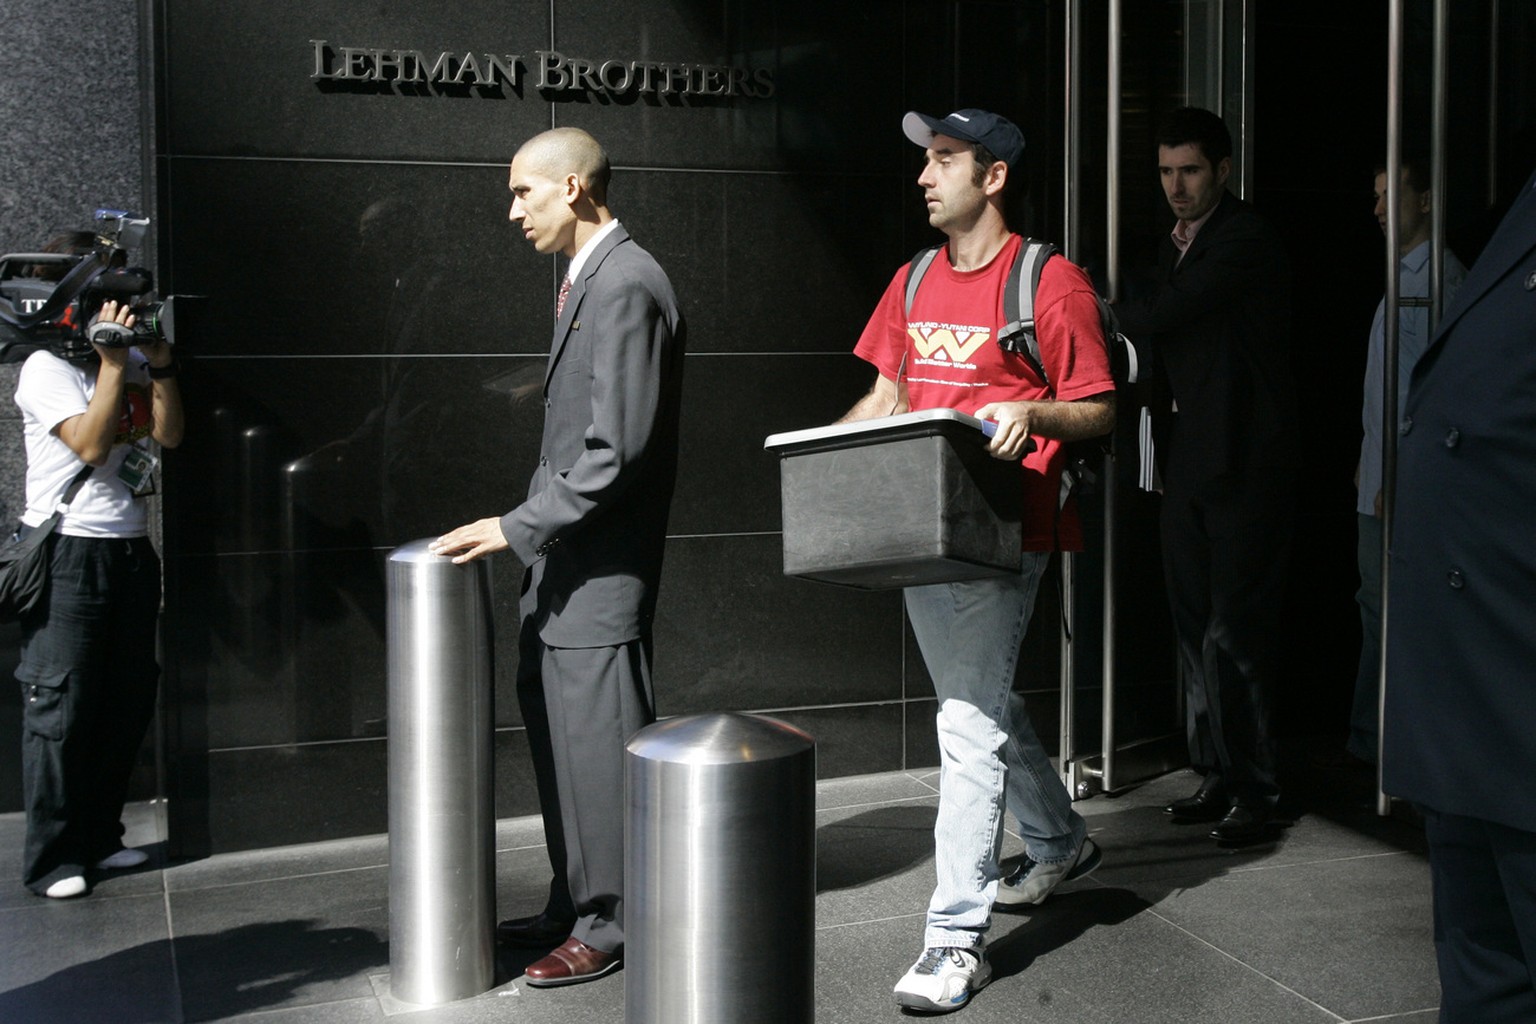 A man leaves the Lehman Brothers headquarters carrying a box, Monday, Sept. 15, 2008 in New York. Lehman Brothers, a 158-year-old investment bank choked by the credit crisis and falling real estate va ...